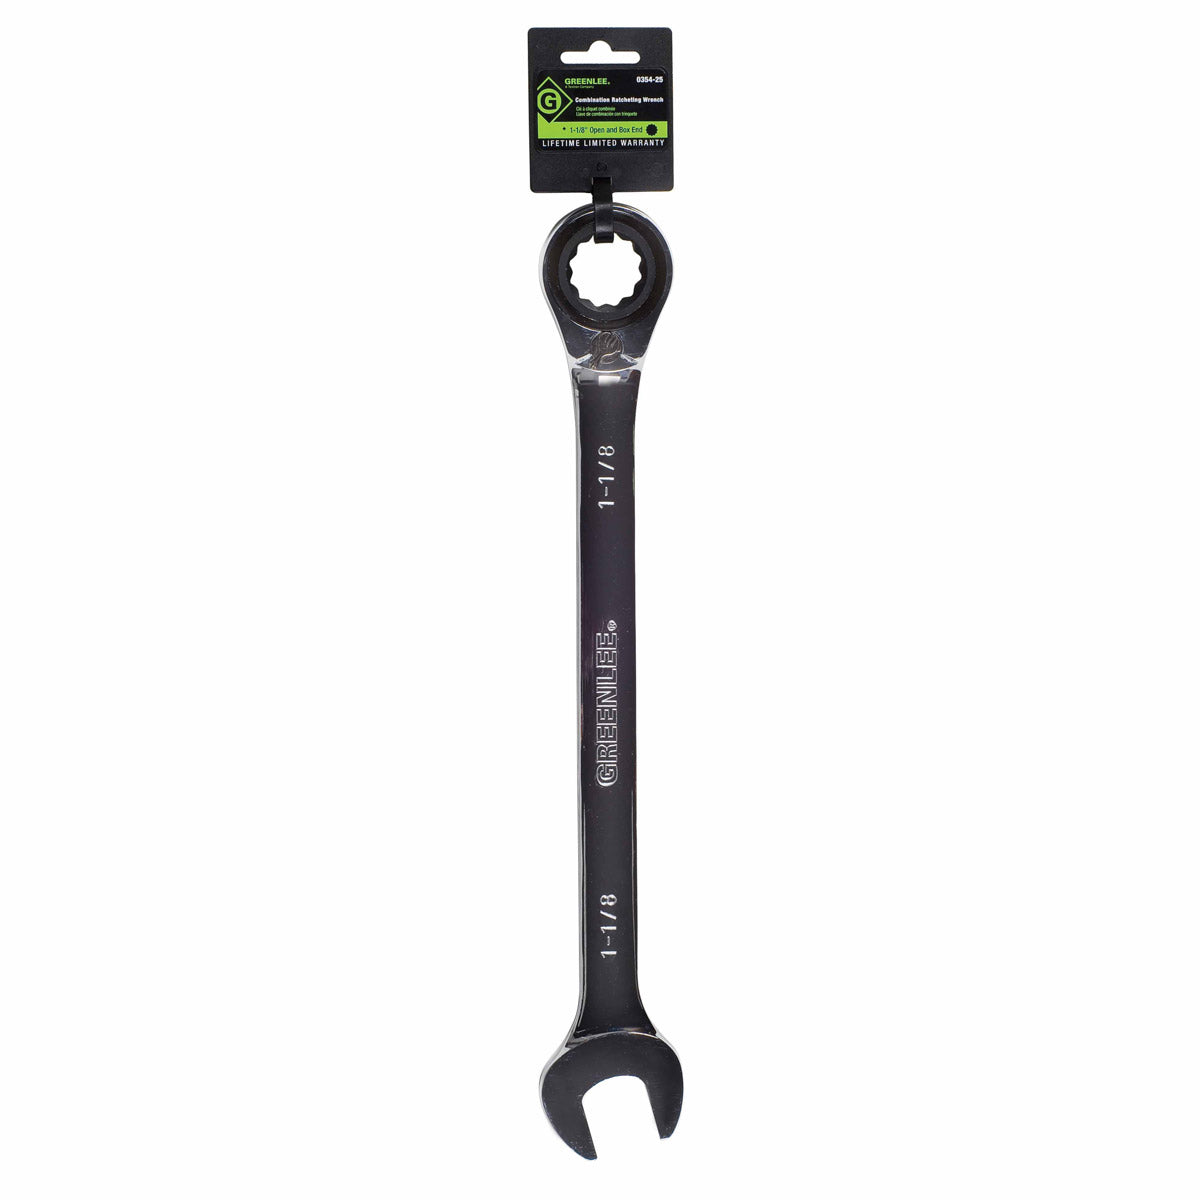 Greenlee 0354-25 1-1/8" Combination Ratcheting Wrench